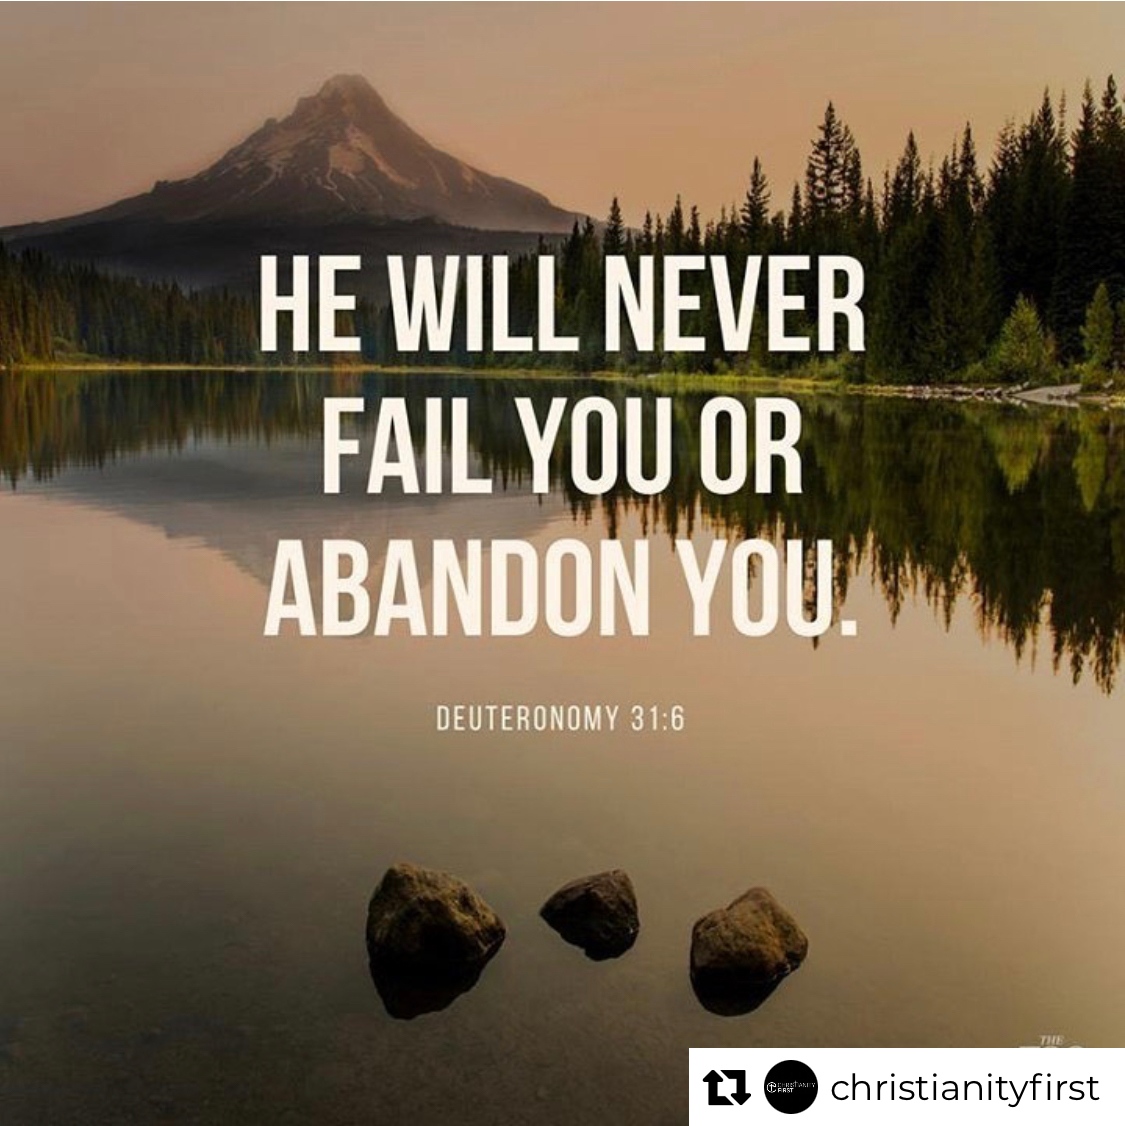 HE WILL NEVER FAIL YOU OR  ABANDON VOU" DEUTERONOMY 31.6 christianityfirst